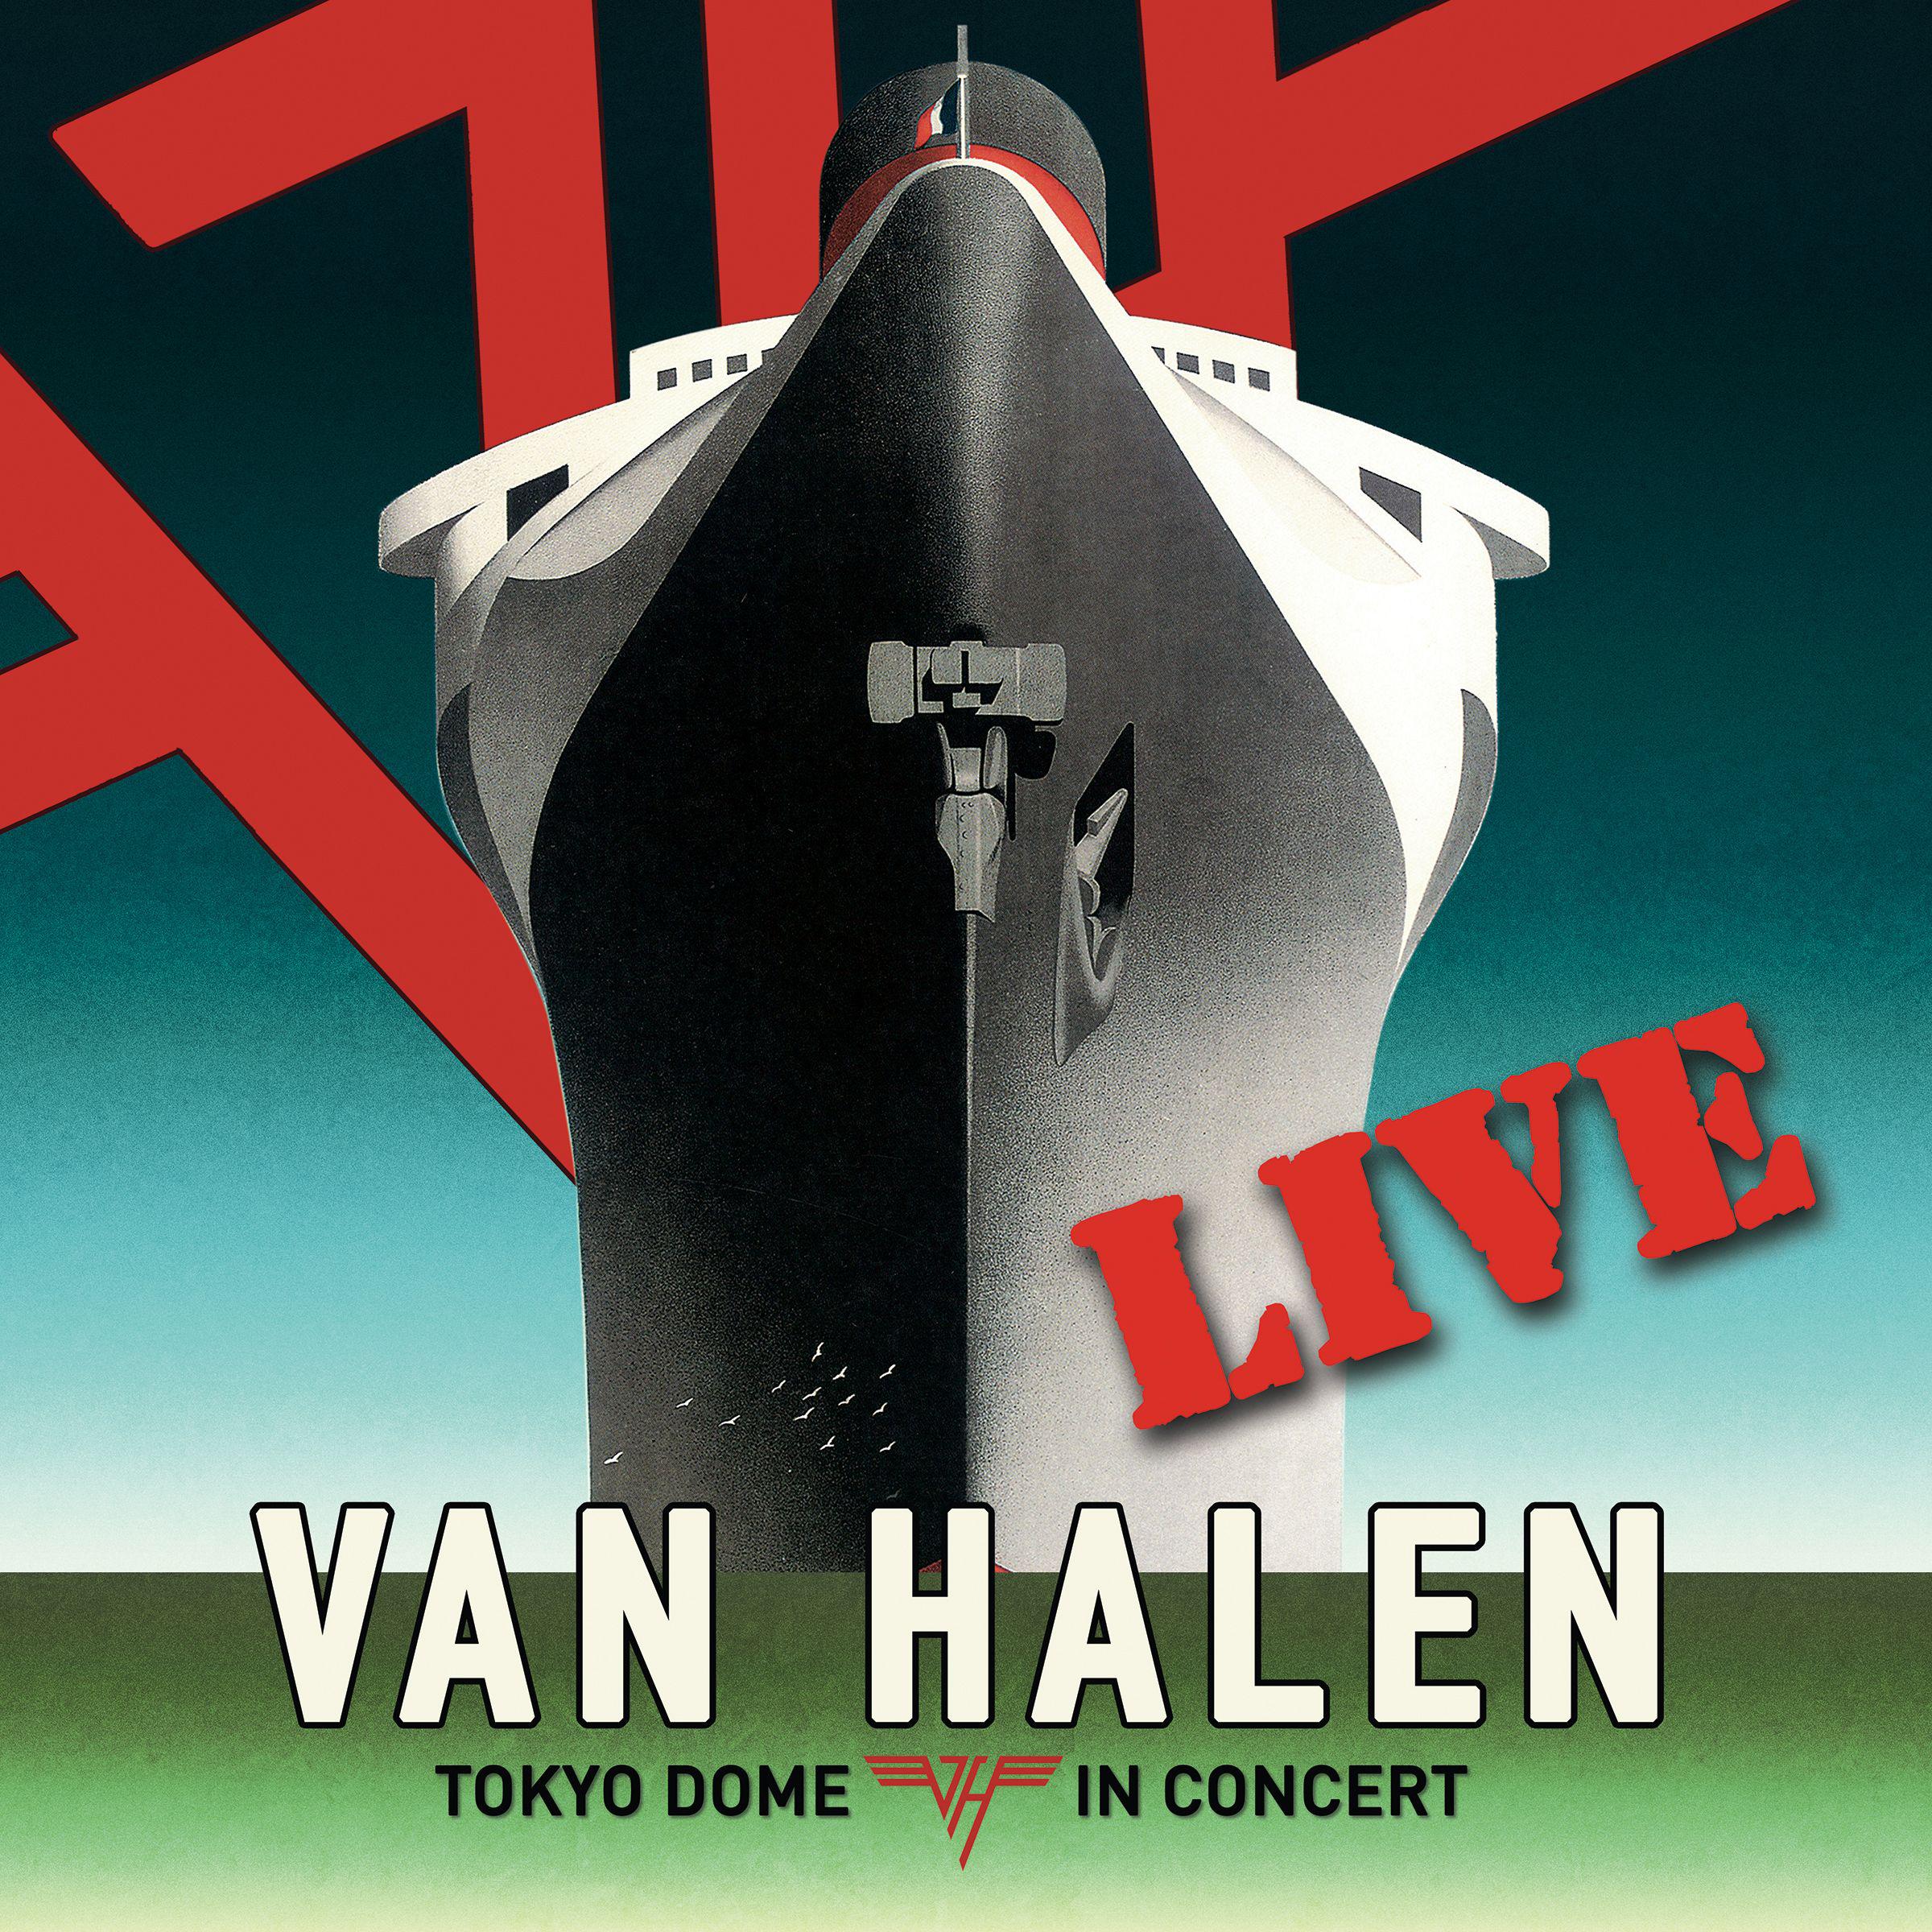 Van Halen - She's the Woman (Live at the Tokyo Dome June 21, 2013)